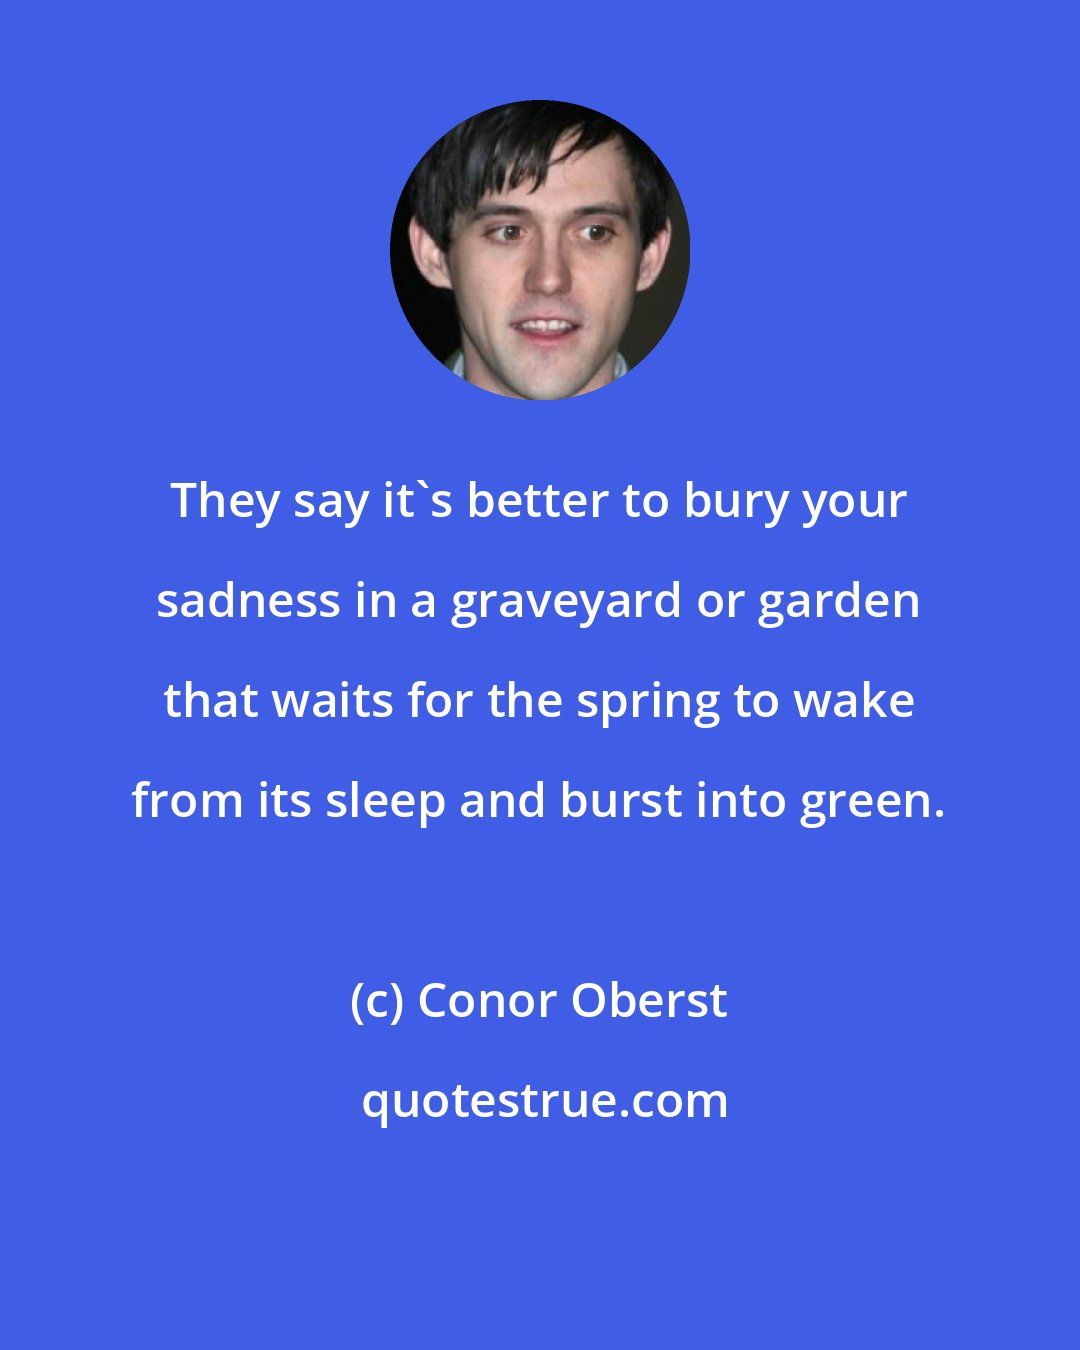 Conor Oberst: They say it's better to bury your sadness in a graveyard or garden that waits for the spring to wake from its sleep and burst into green.